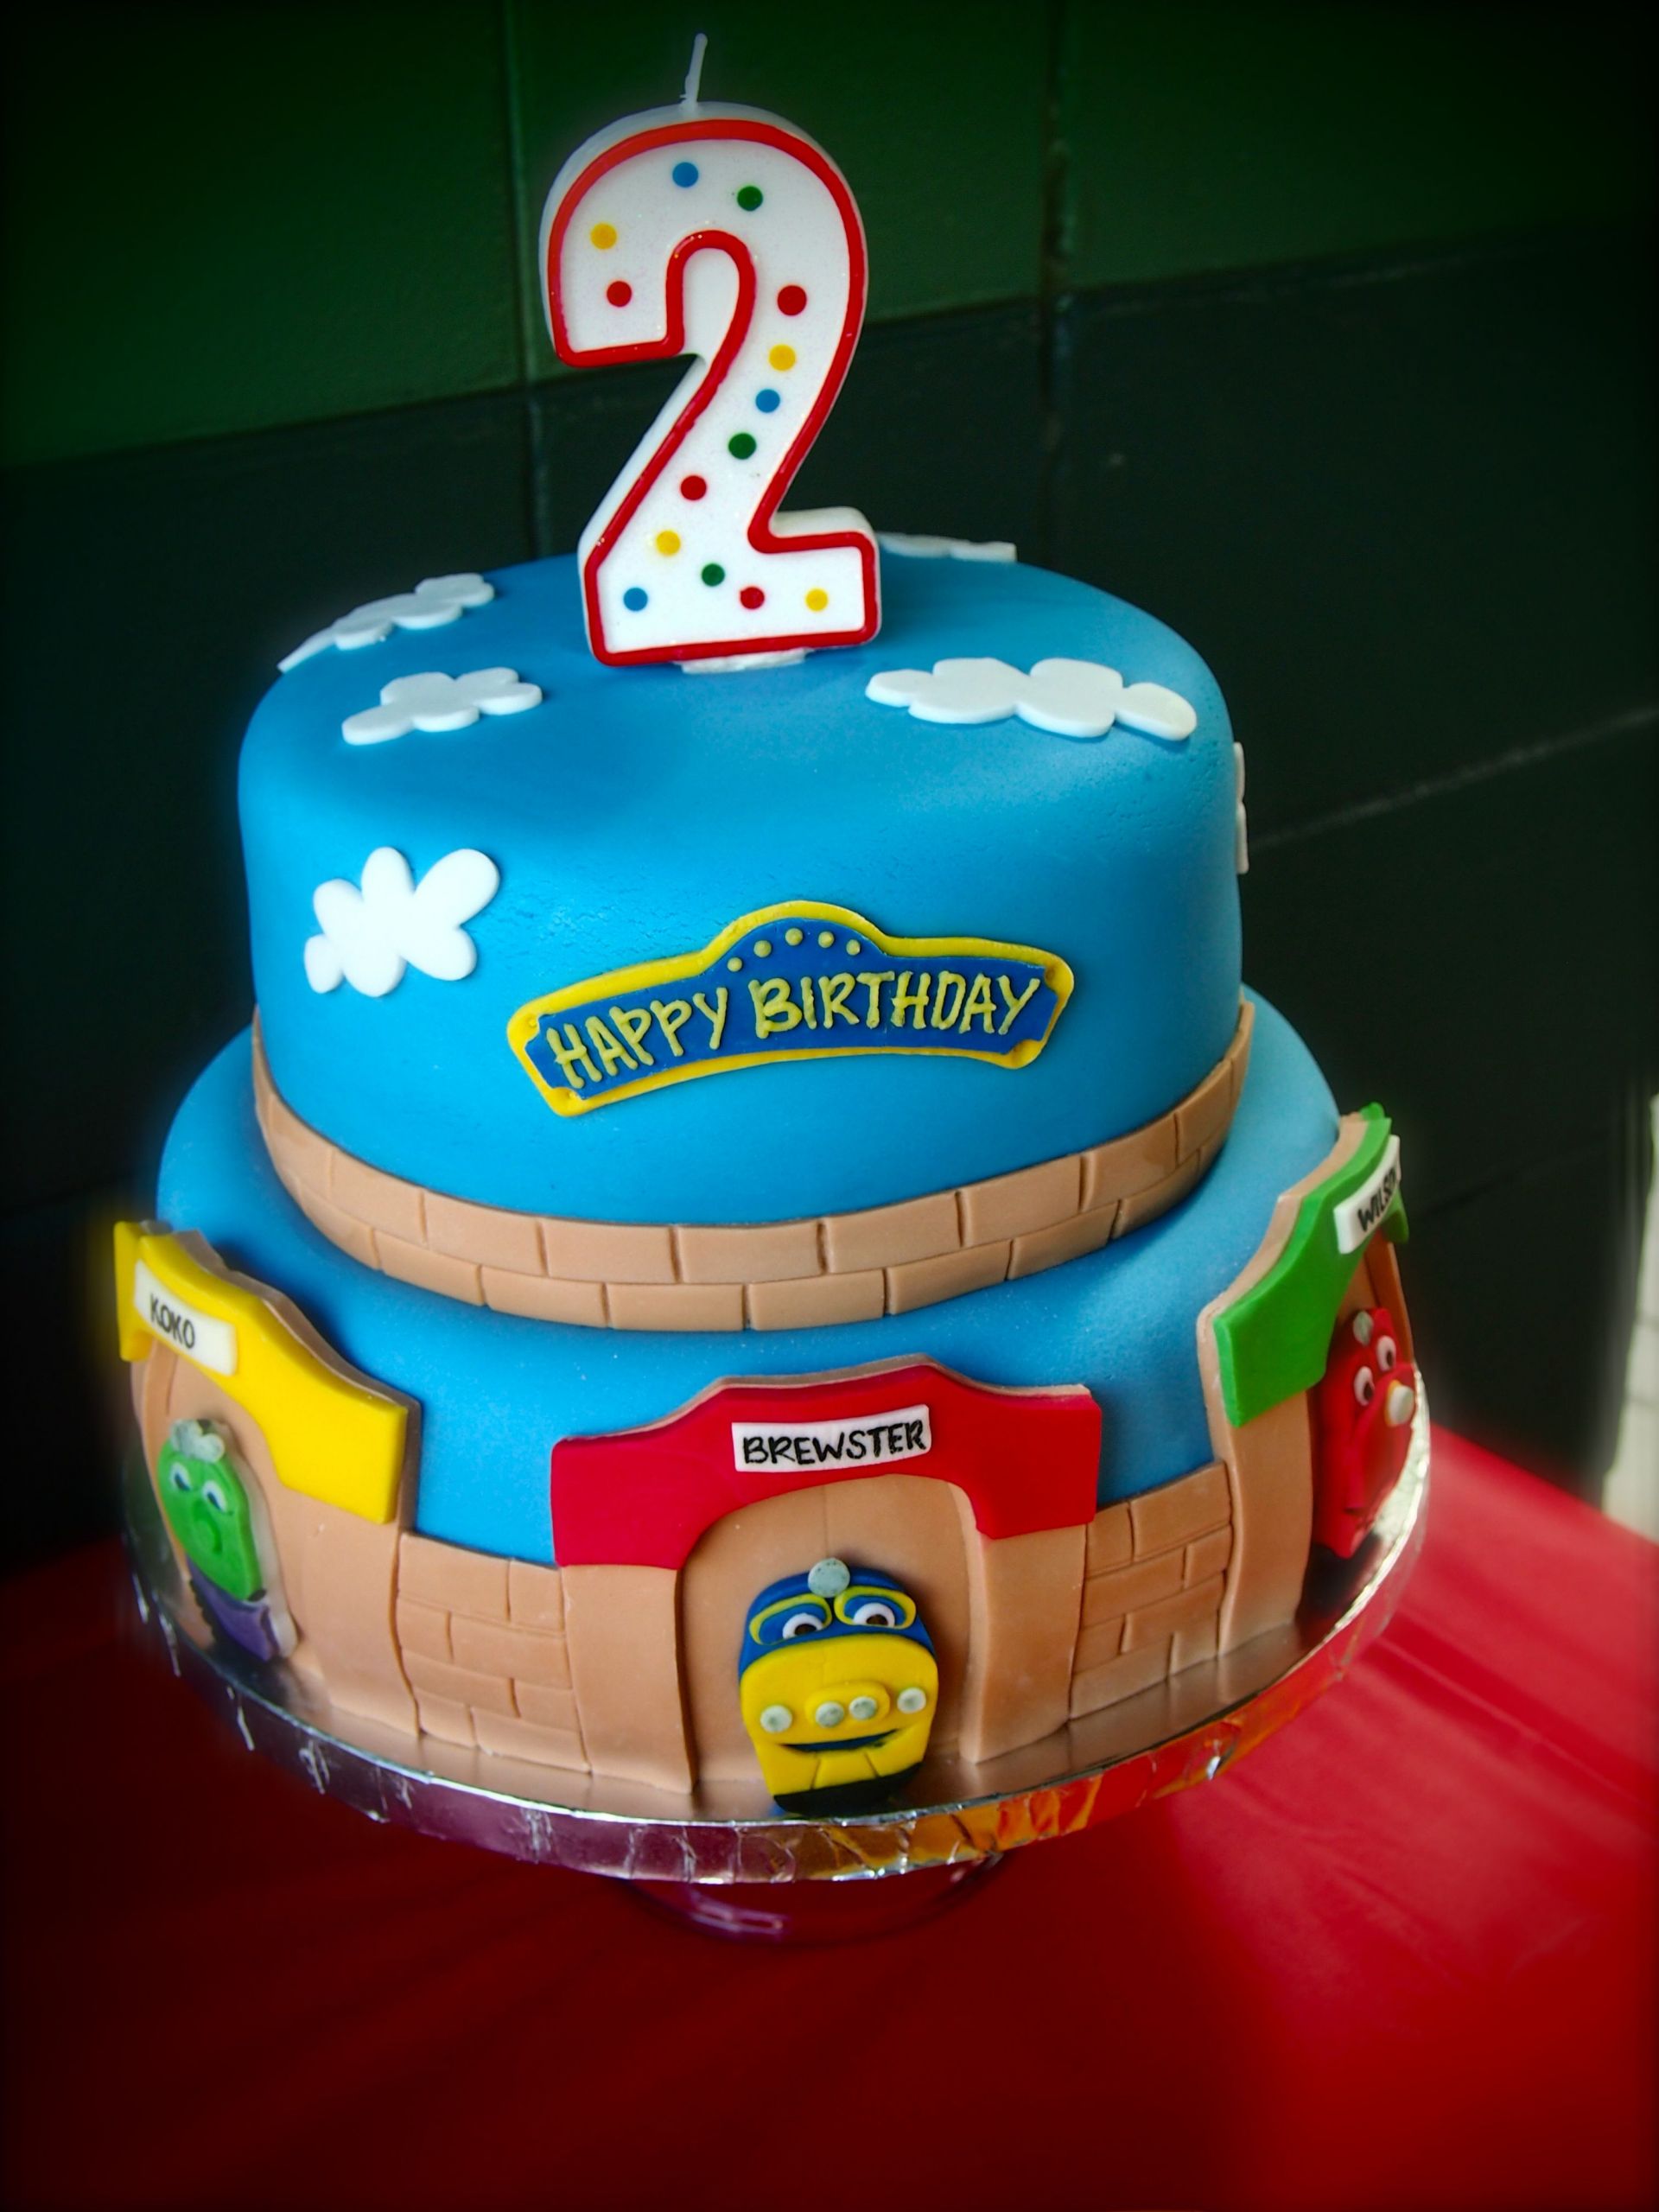 Chuggington Birthday Cake
 Chuggington Birthday Cake by Olive Parties